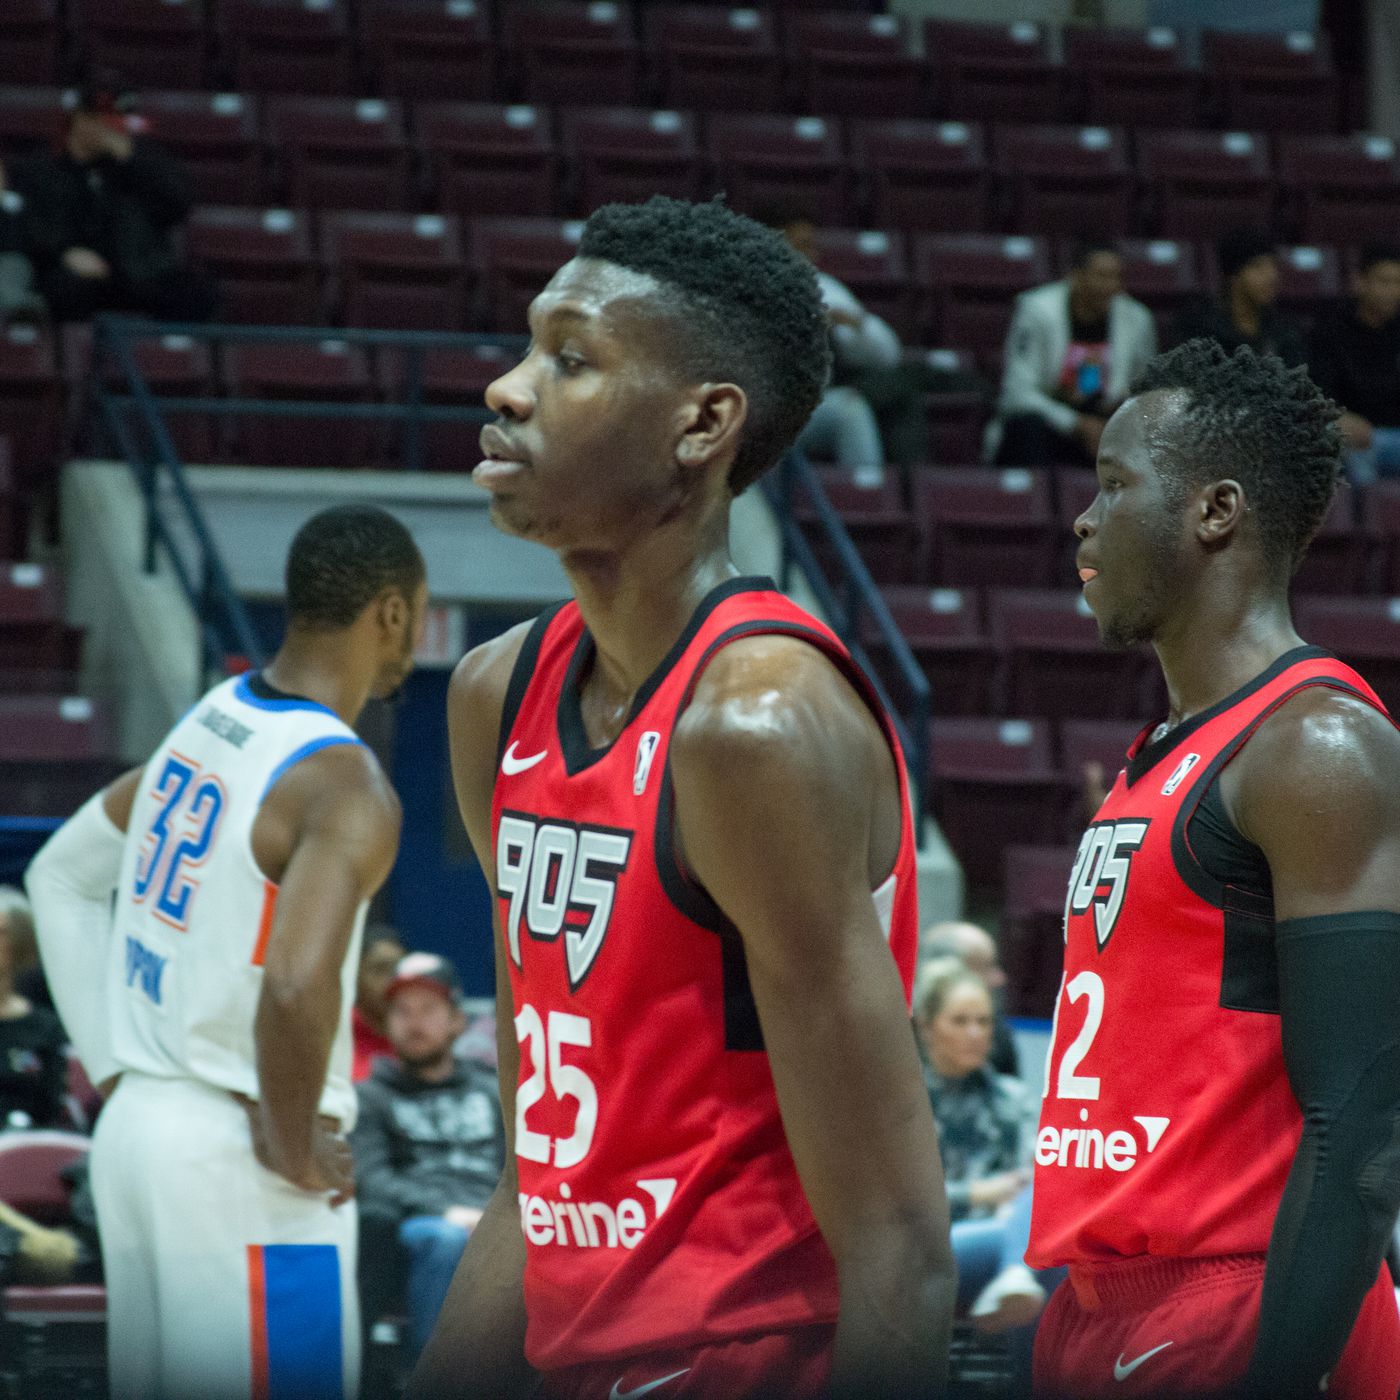 G League Raptors 905 Scouting: Is Chris Boucher ready for his